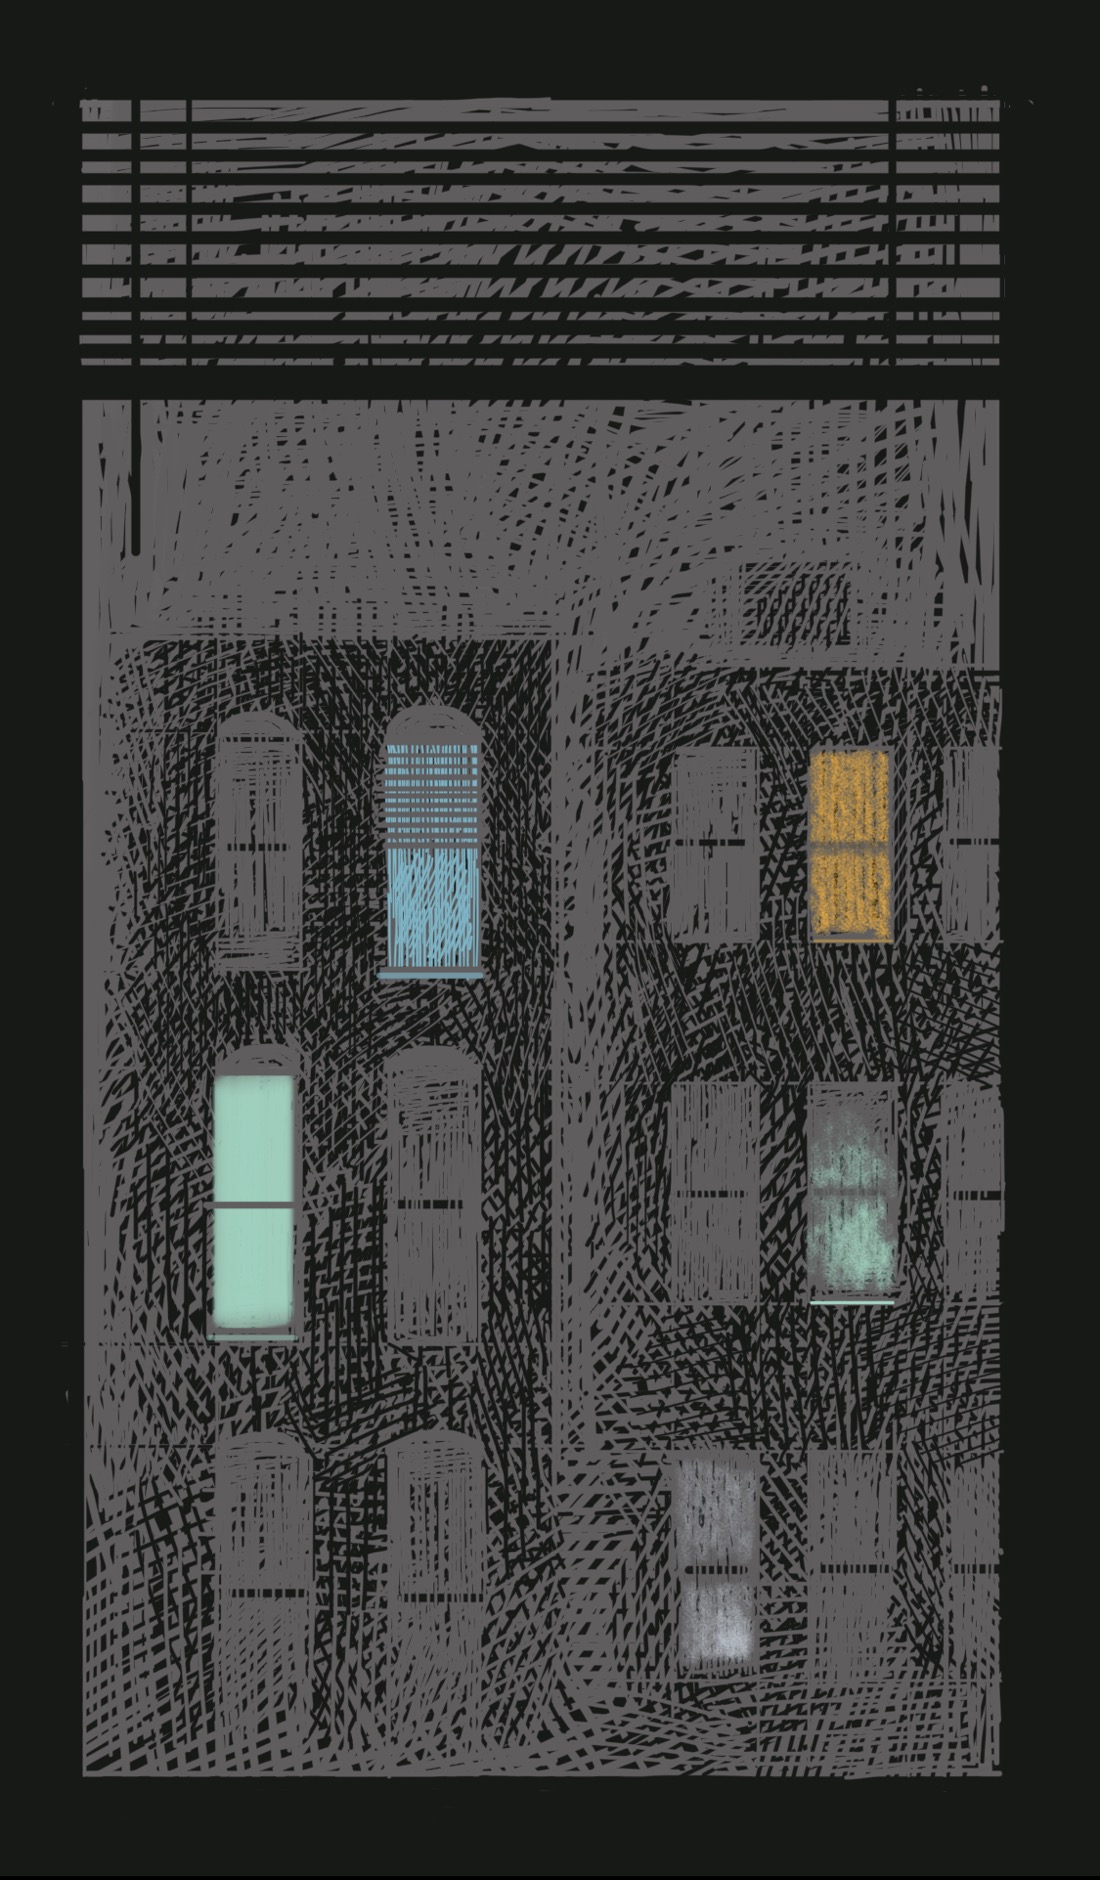 A scene through a tall, grimy window with venetian blinds at the top. The window looks out onto two tenement buildings, either next door or across the street. It's night, but not a dark night so much as a dull, cloudy, light-polluted night. The buildings are mostly dark, with no street lights or external illumination visible. There is no moon or stars. A few of the windows in the buildings are dimly lit, suggesting television screens or reading lamps inside. No figures can be seen behind the windows.